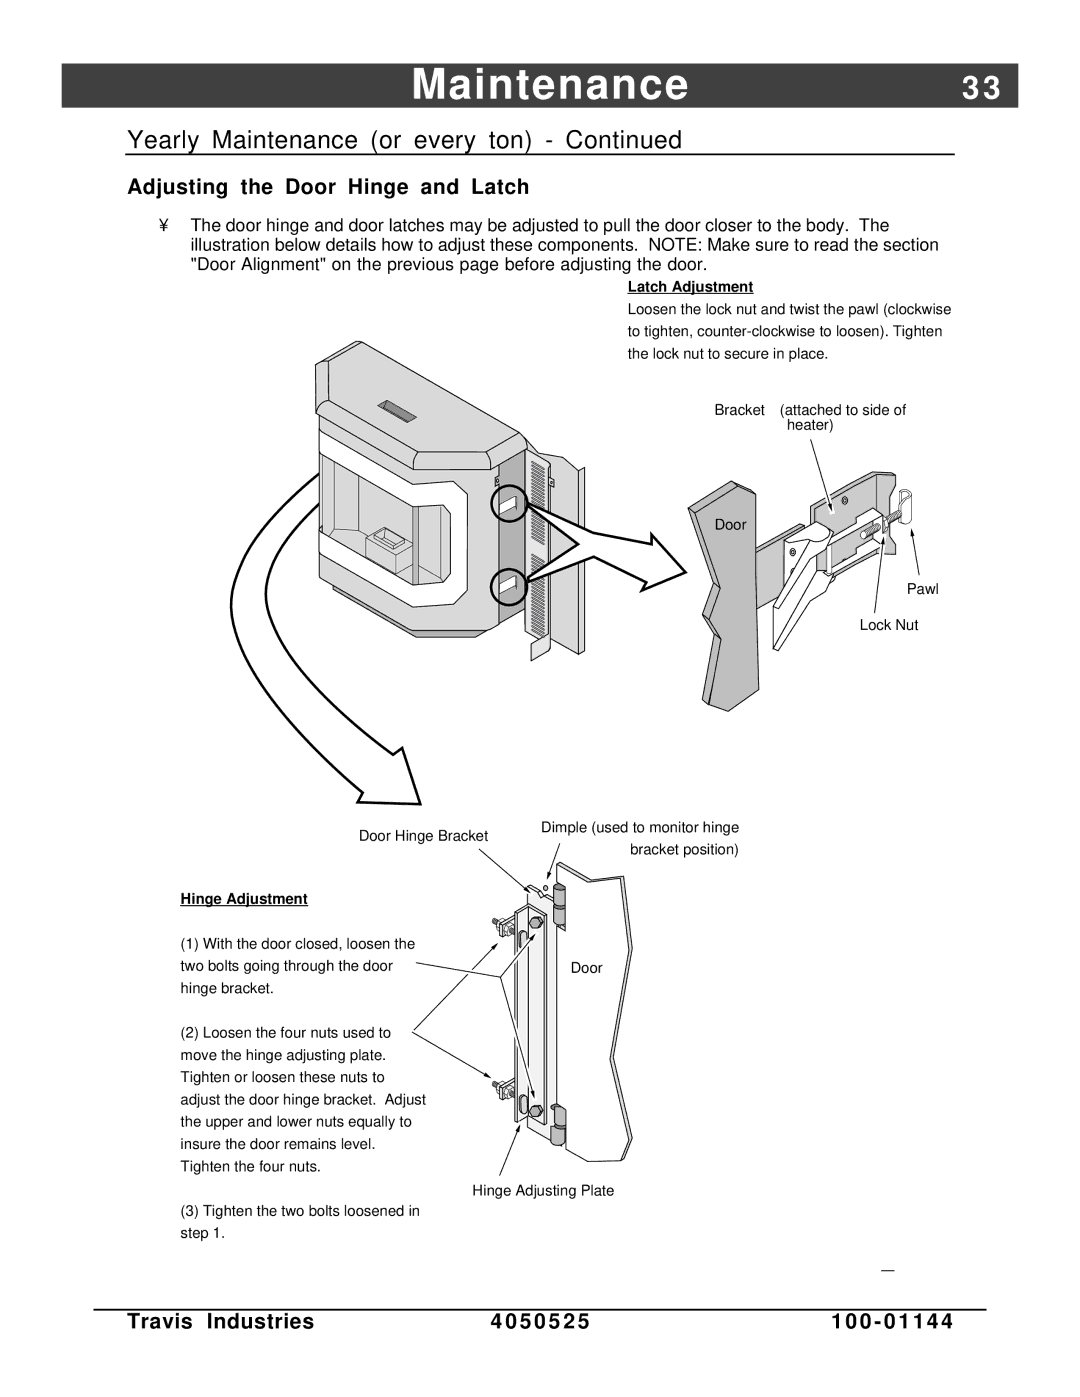 Avalon Stoves Indoor Fireplace manual Adjusting the Door Hinge and Latch, Hinge Adjustment 